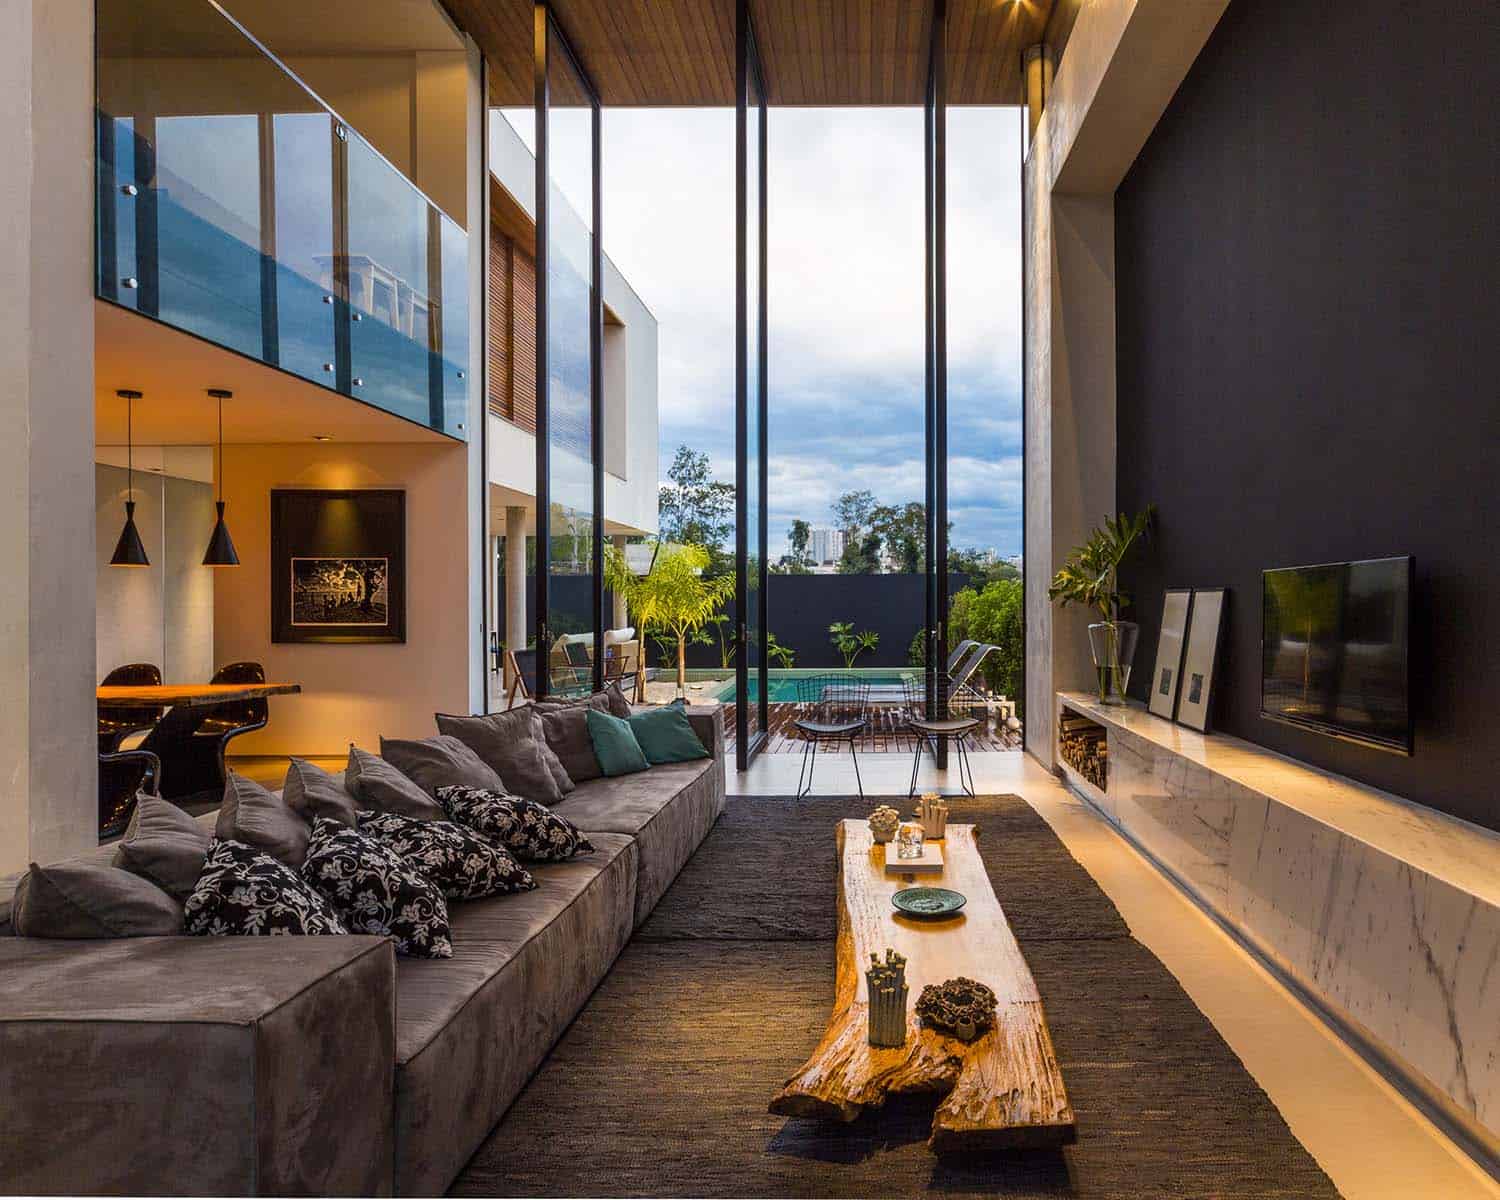 Architecturally striking two-story modern dwelling in Brazil